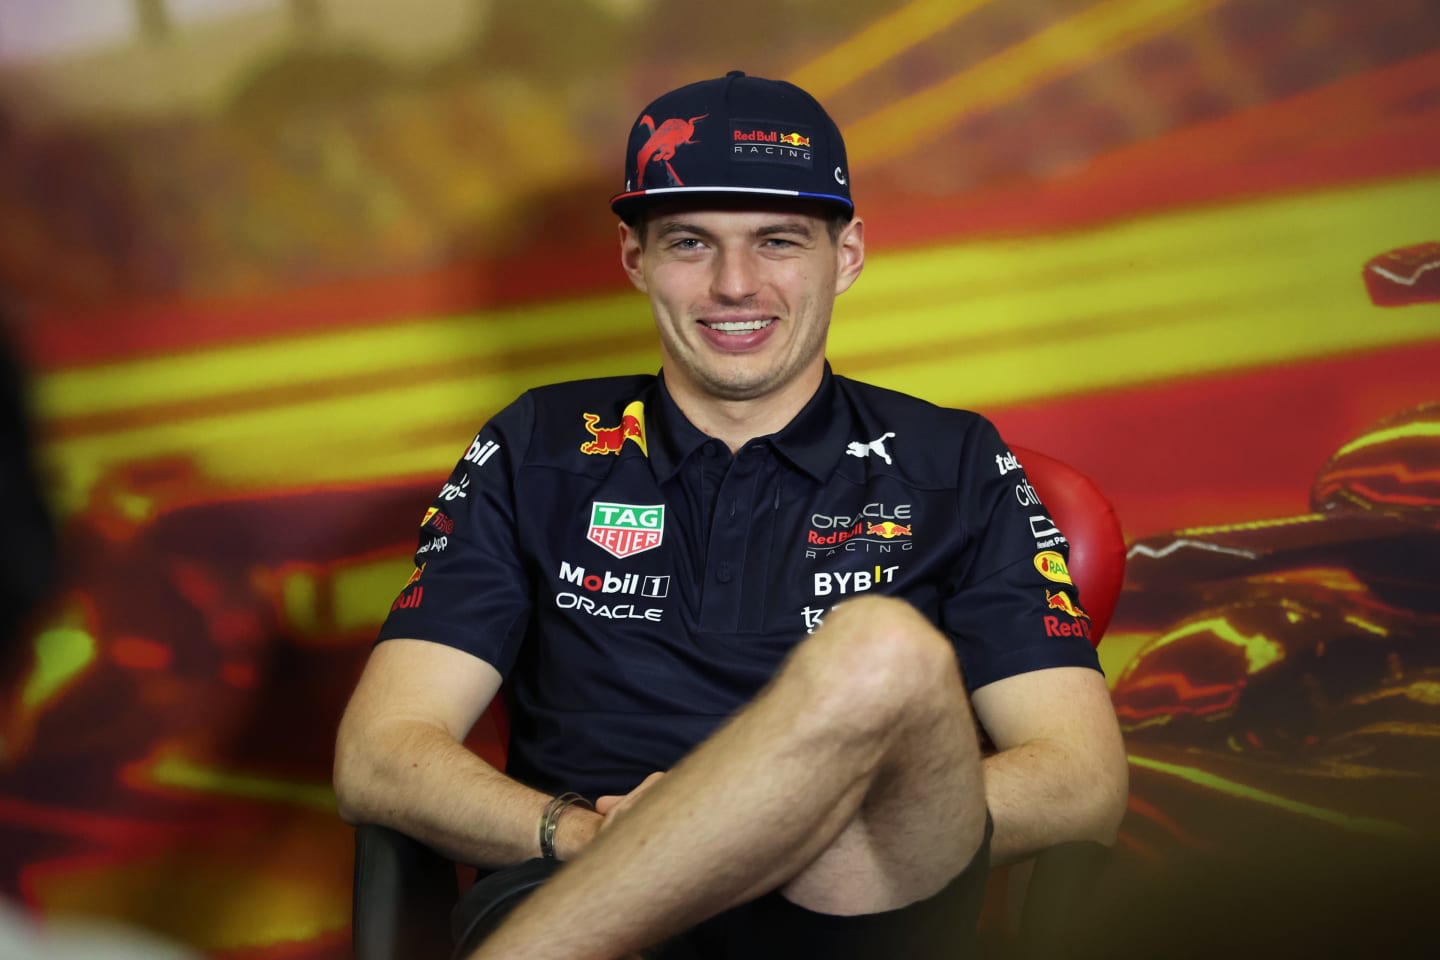 BARCELONA, SPAIN - MAY 20: Max Verstappen of the Netherlands and Oracle Red Bull Racing looks on in the Drivers Press Conference prior to practice ahead of the F1 Grand Prix of Spain at Circuit de Barcelona-Catalunya on May 20, 2022 in Barcelona, Spain. (Photo by Bryn Lennon/Getty Images)